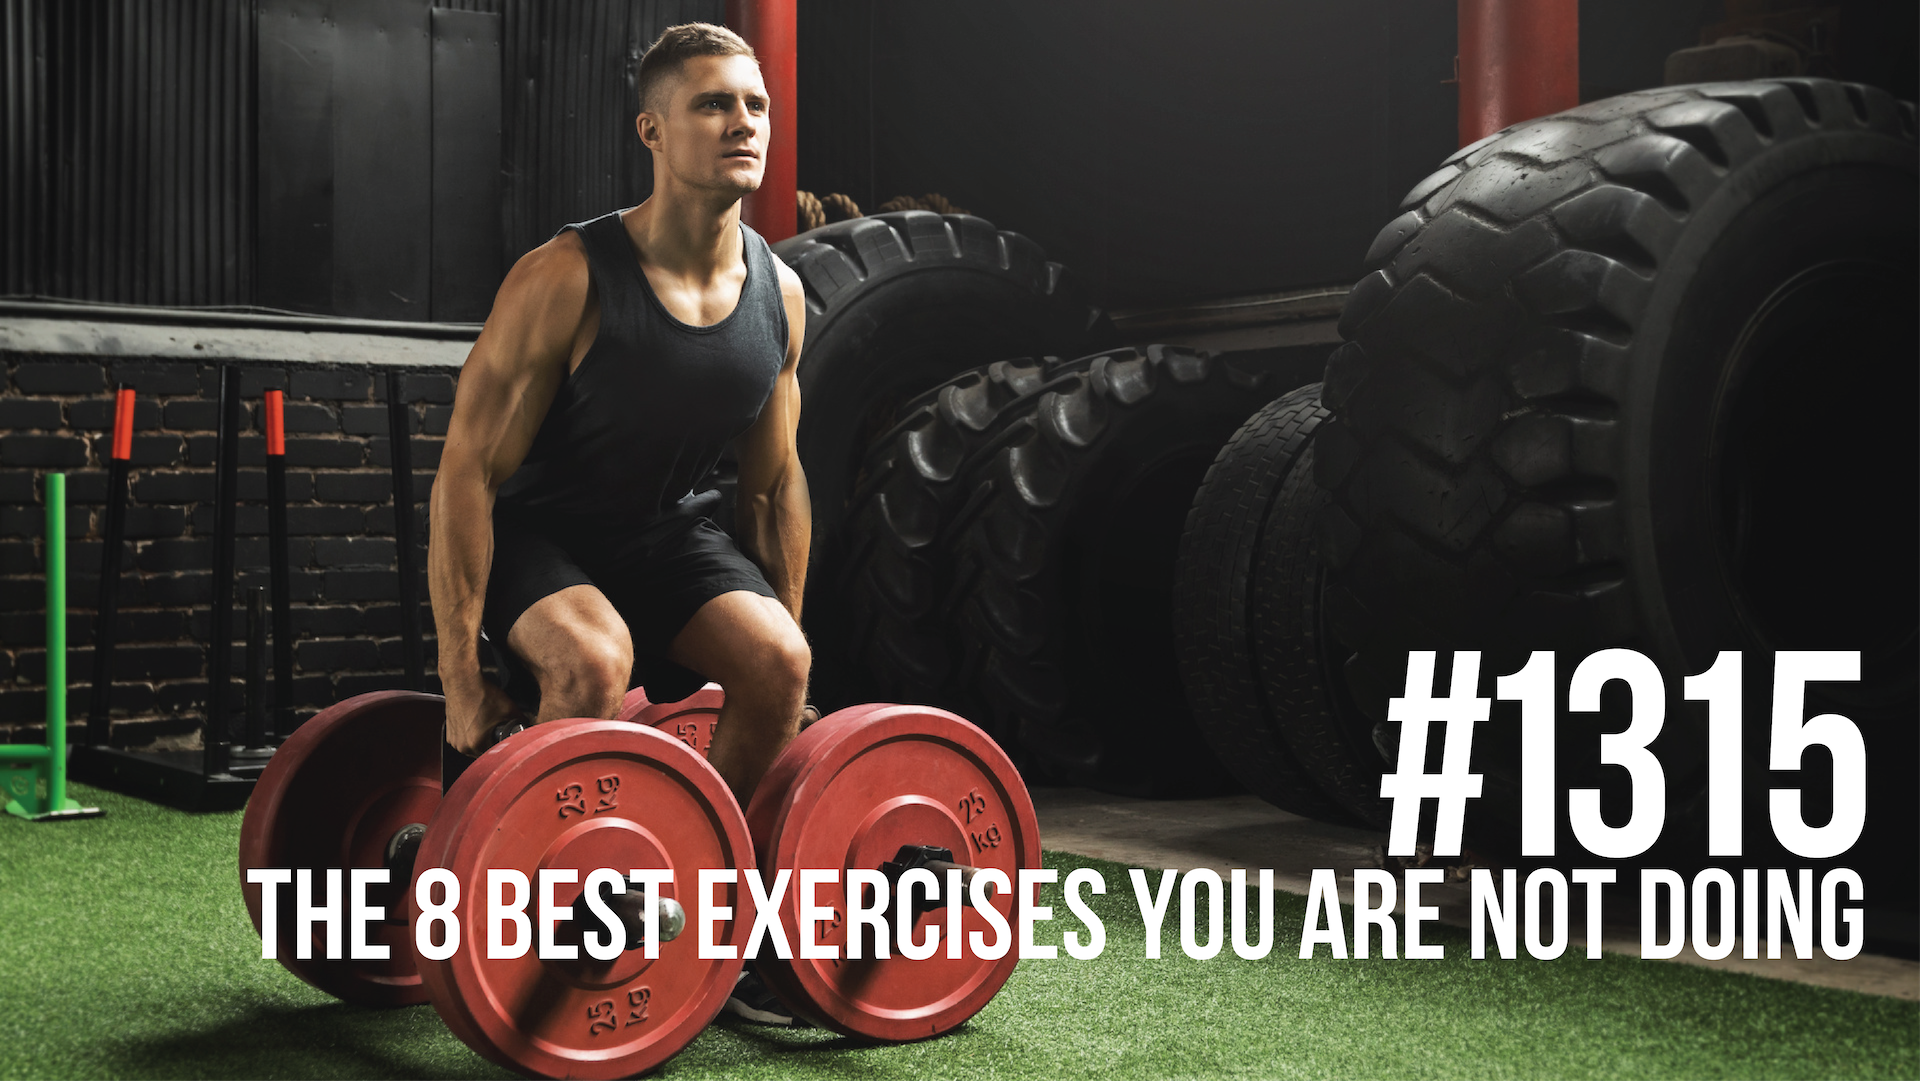 1315: The 8 Best Exercises You Are Not Doing